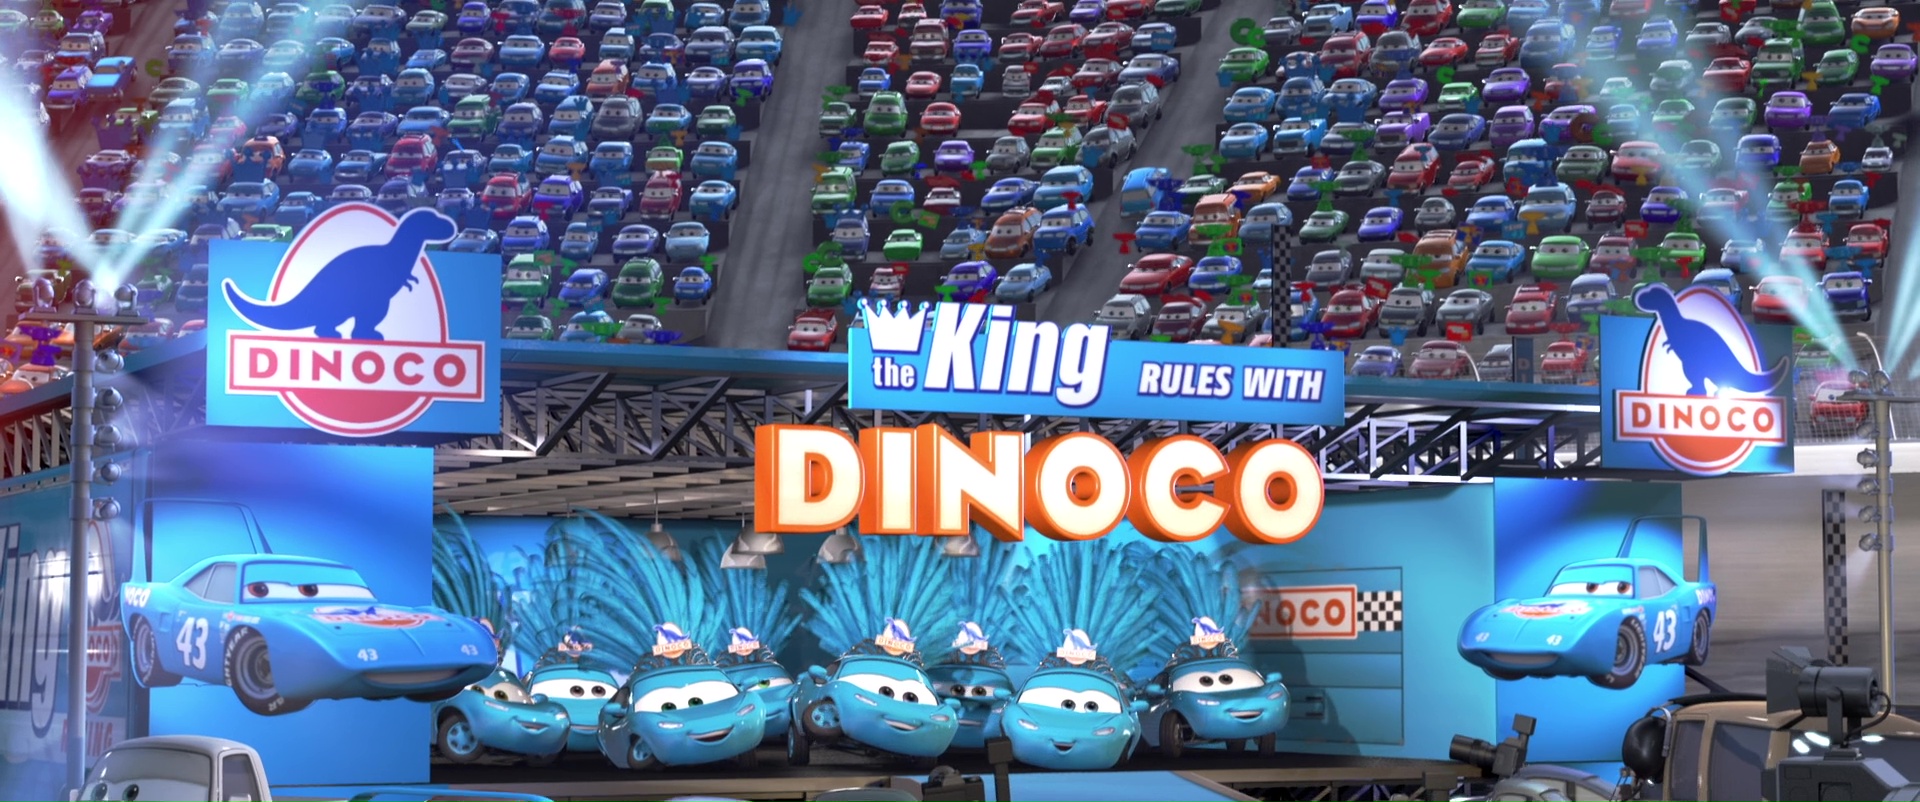 dinoco toy story and cars